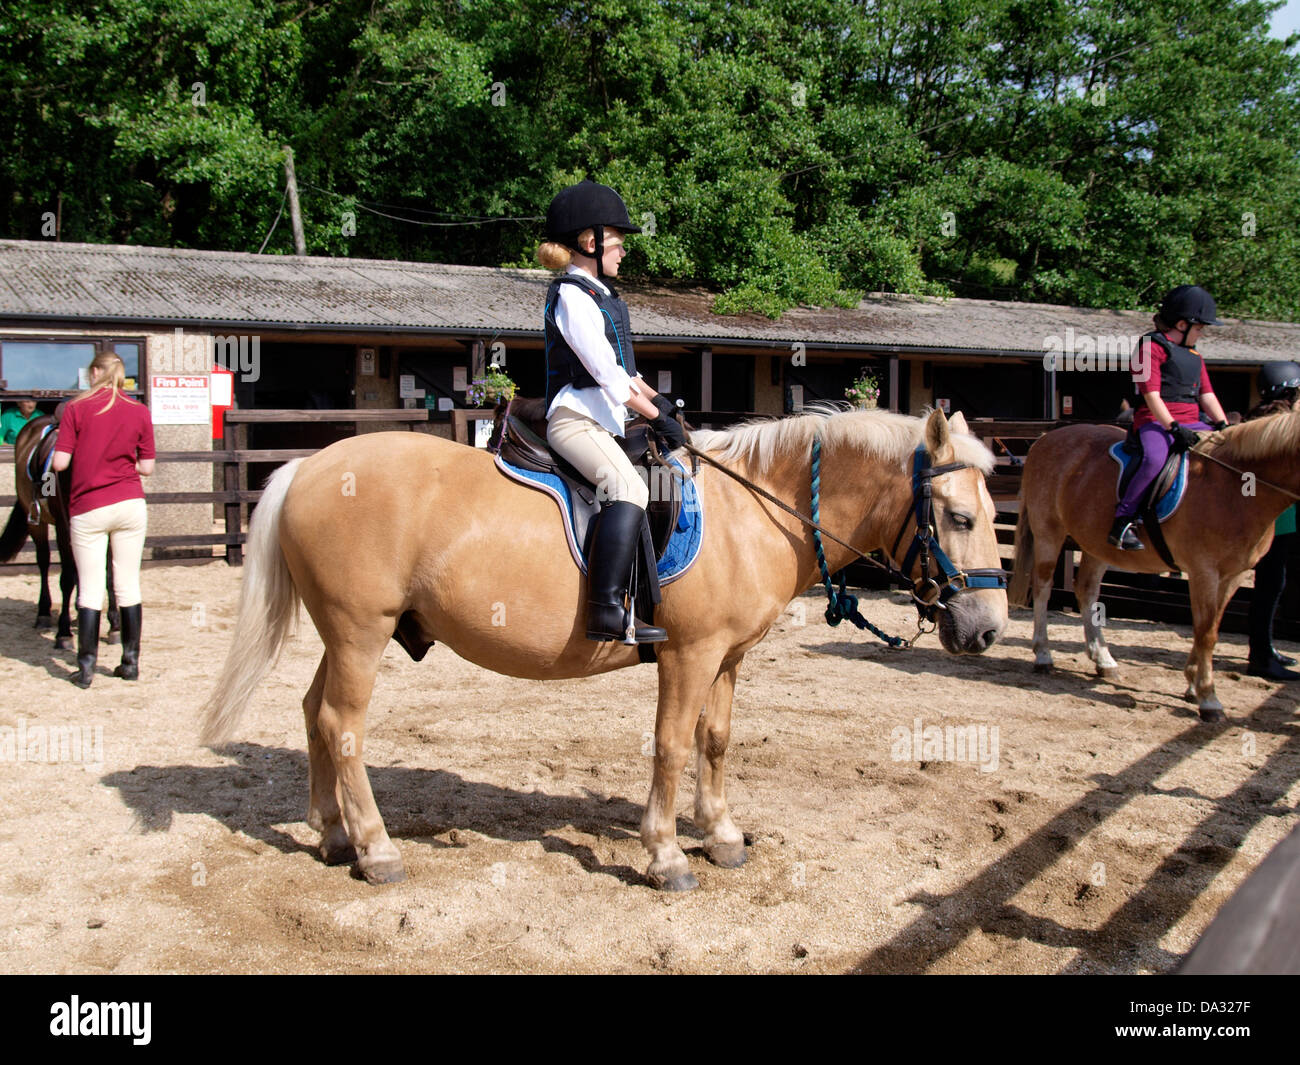 Young girls at a riding school, UK 2013 Stock Photo